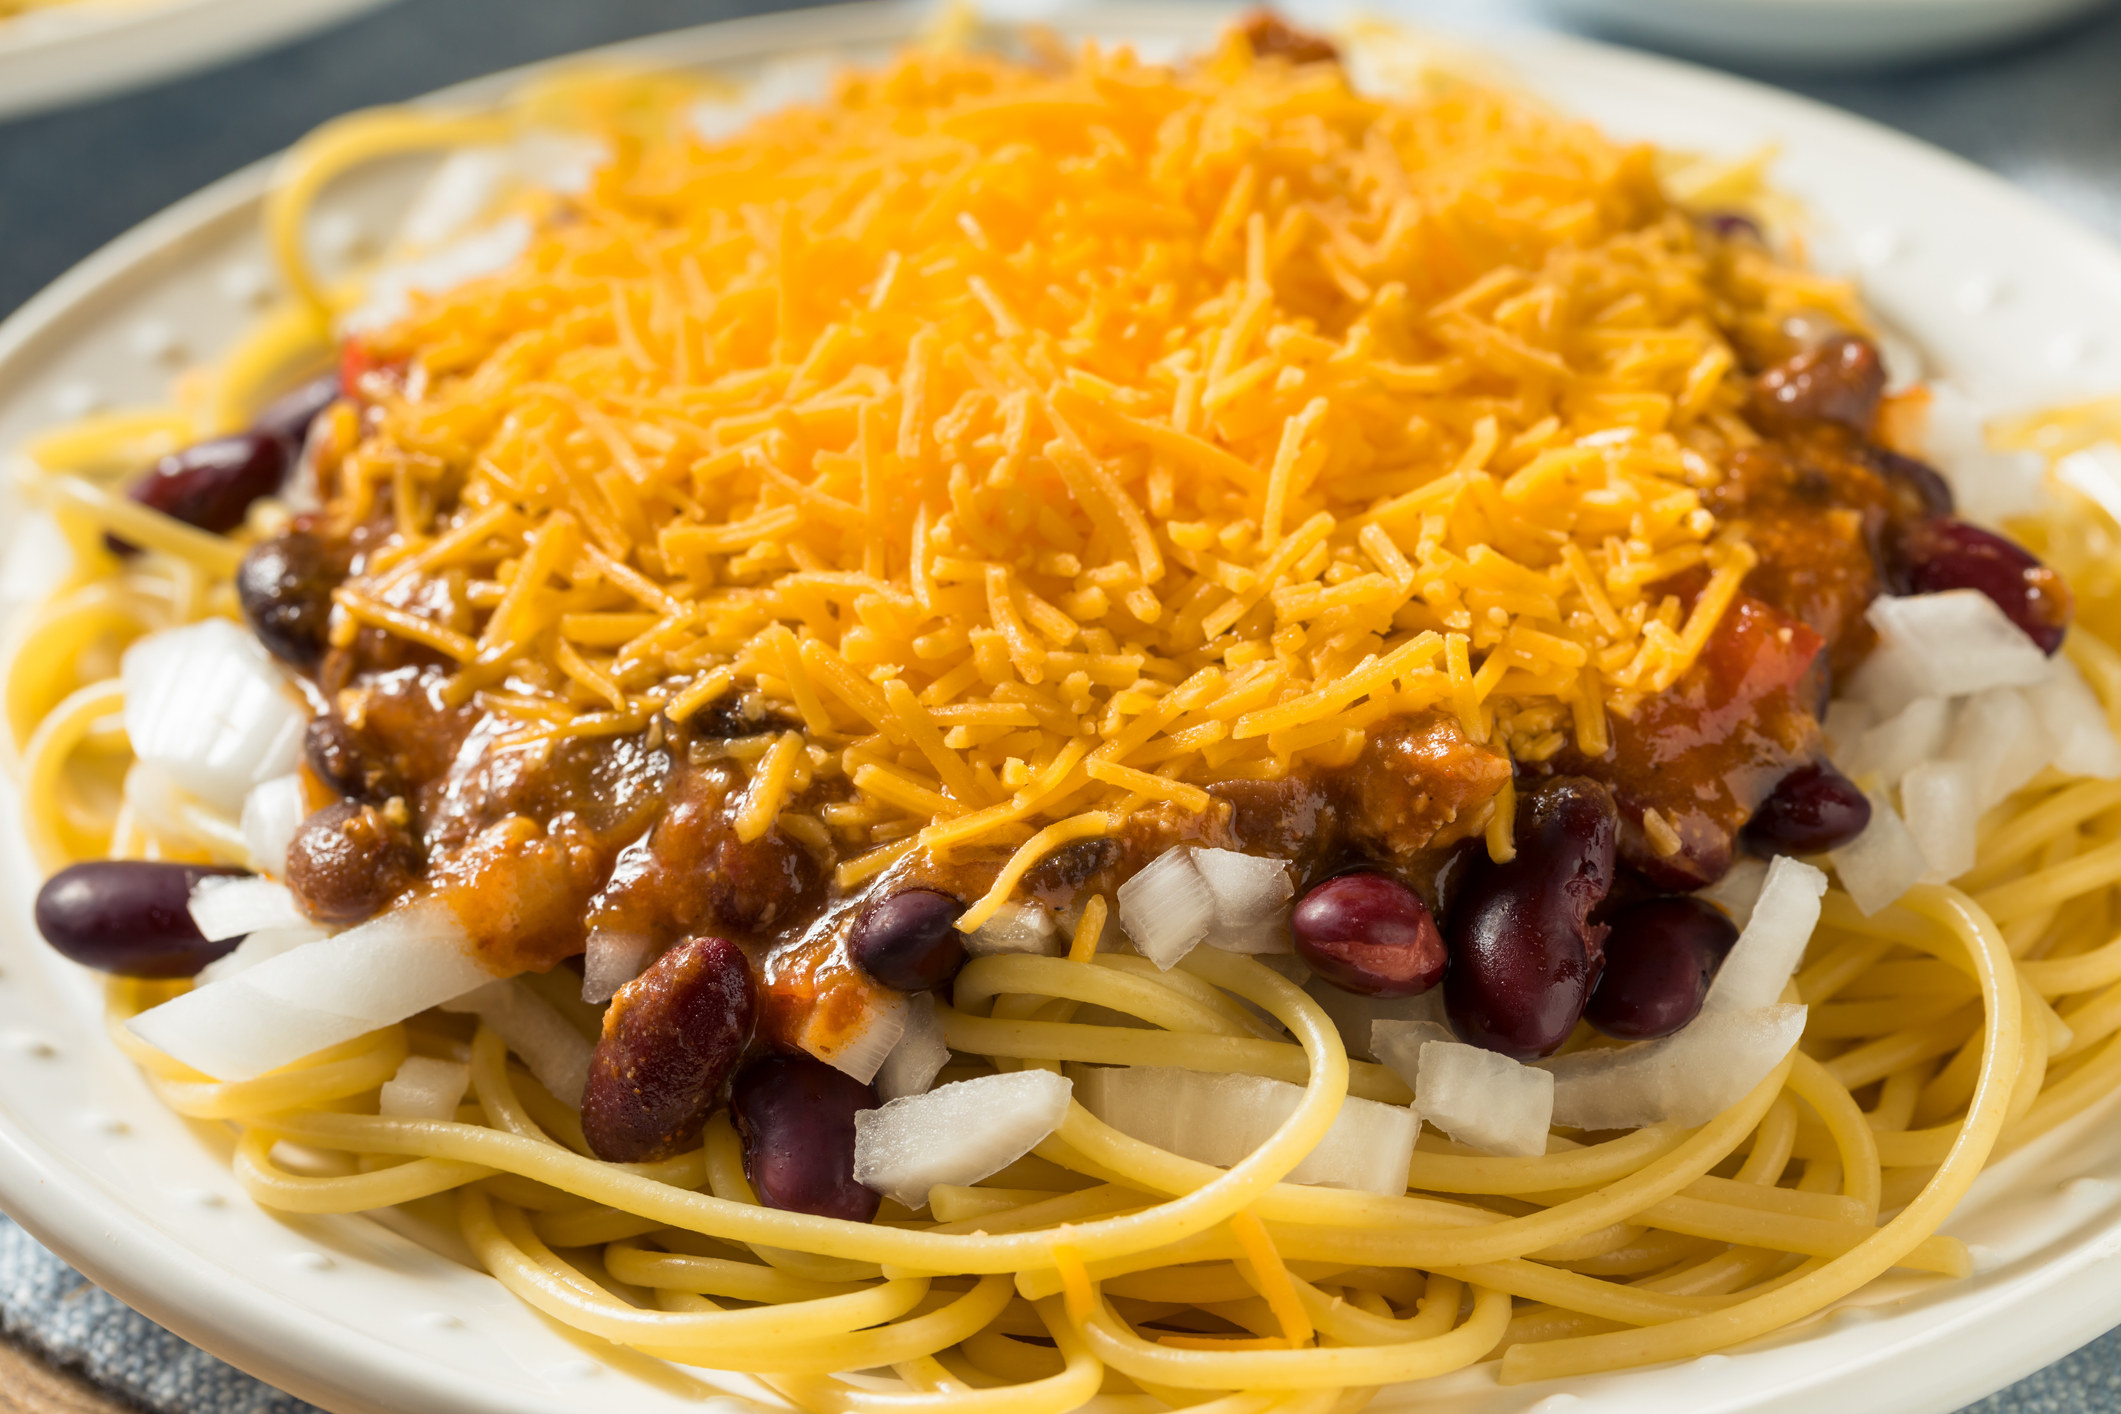 Pasta topped with onions, chili, and cheese